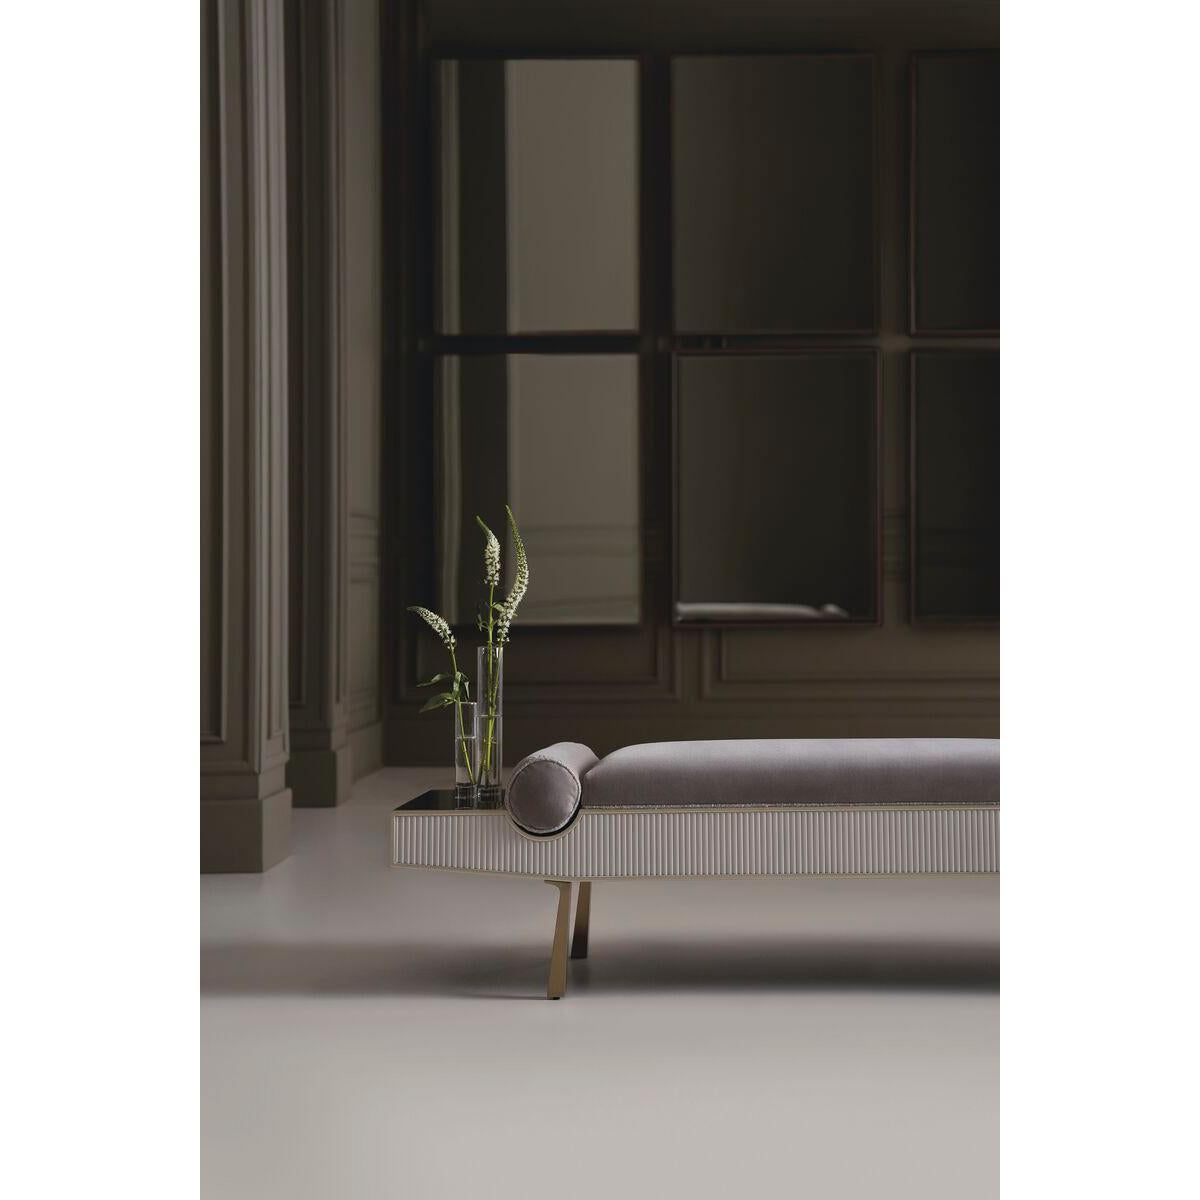 Elegant in a luxe material mix, this streamlined bench is well-scaled for the end-of-bed or an entryway.

A reeded apron in a creamy Almond Milk finish brings a sense of rhythm and striking pattern, complemented by a soft gray mohair fabric with a